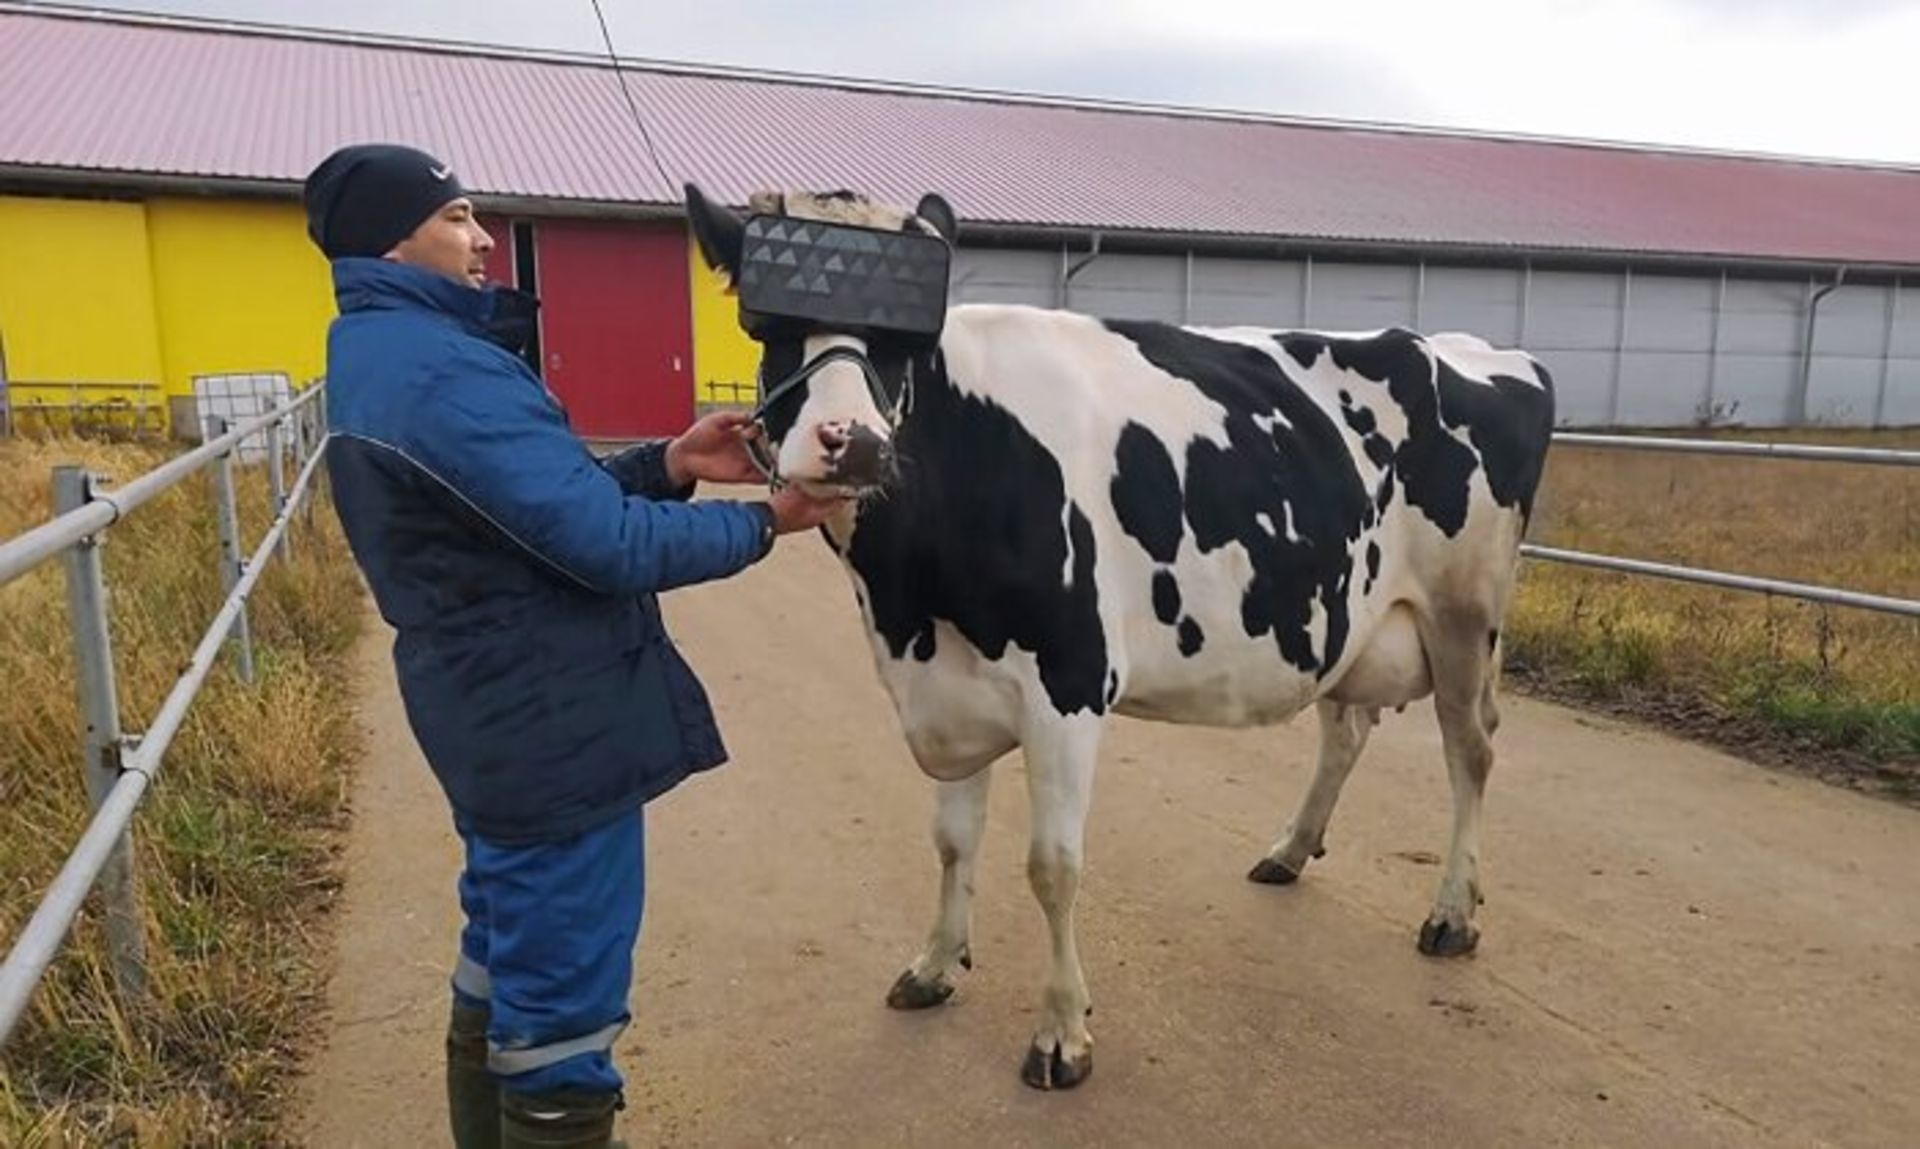 VR HEADSET FOR COWS